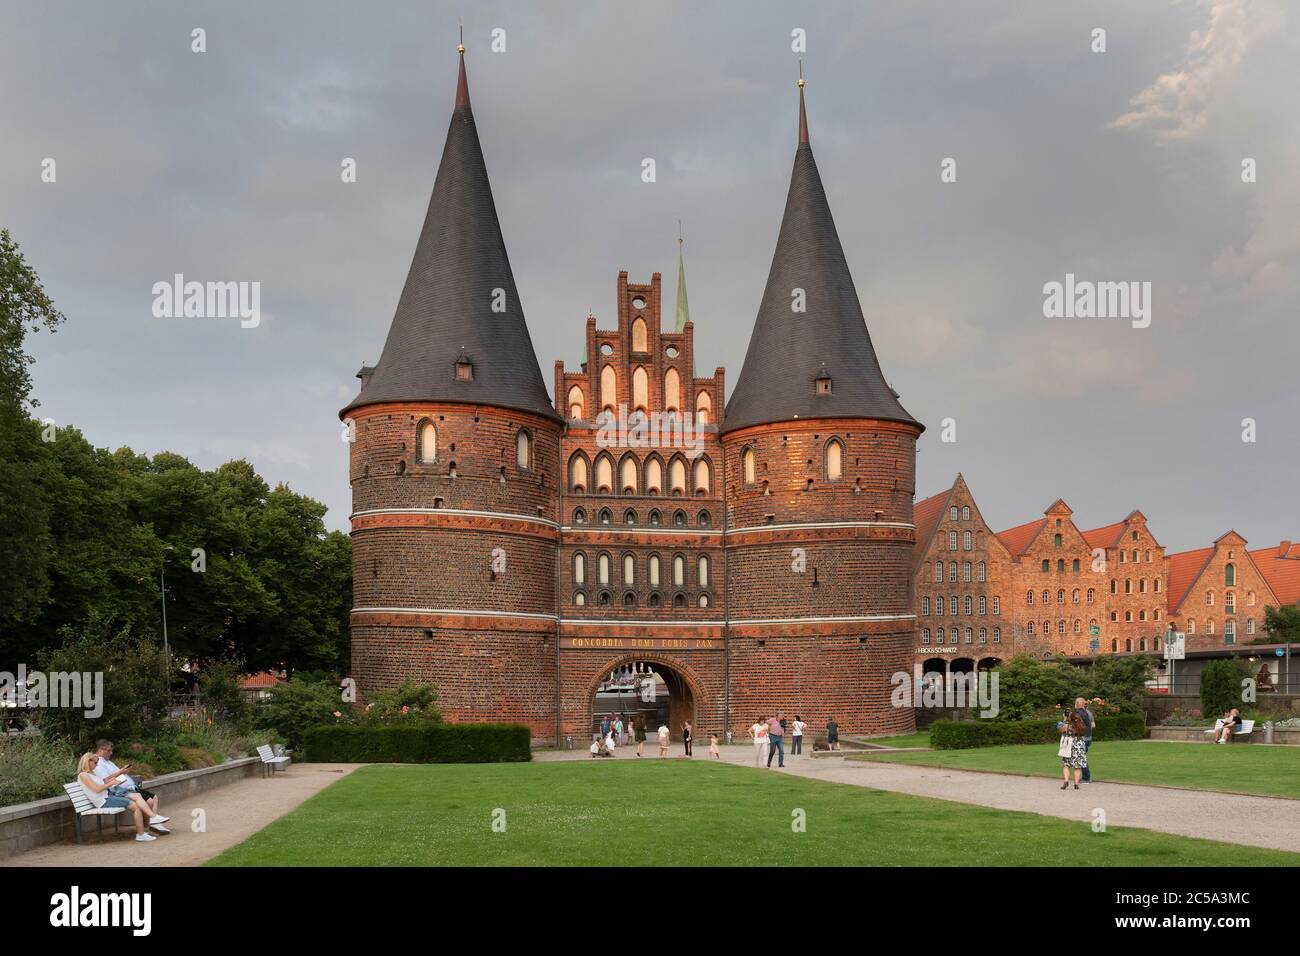 The Holstentor ('Holstein Gate') is a city gate that borders the old town of the Hanseatic city of Luebeck to the west. It is the symbol of the city. Stock Photo